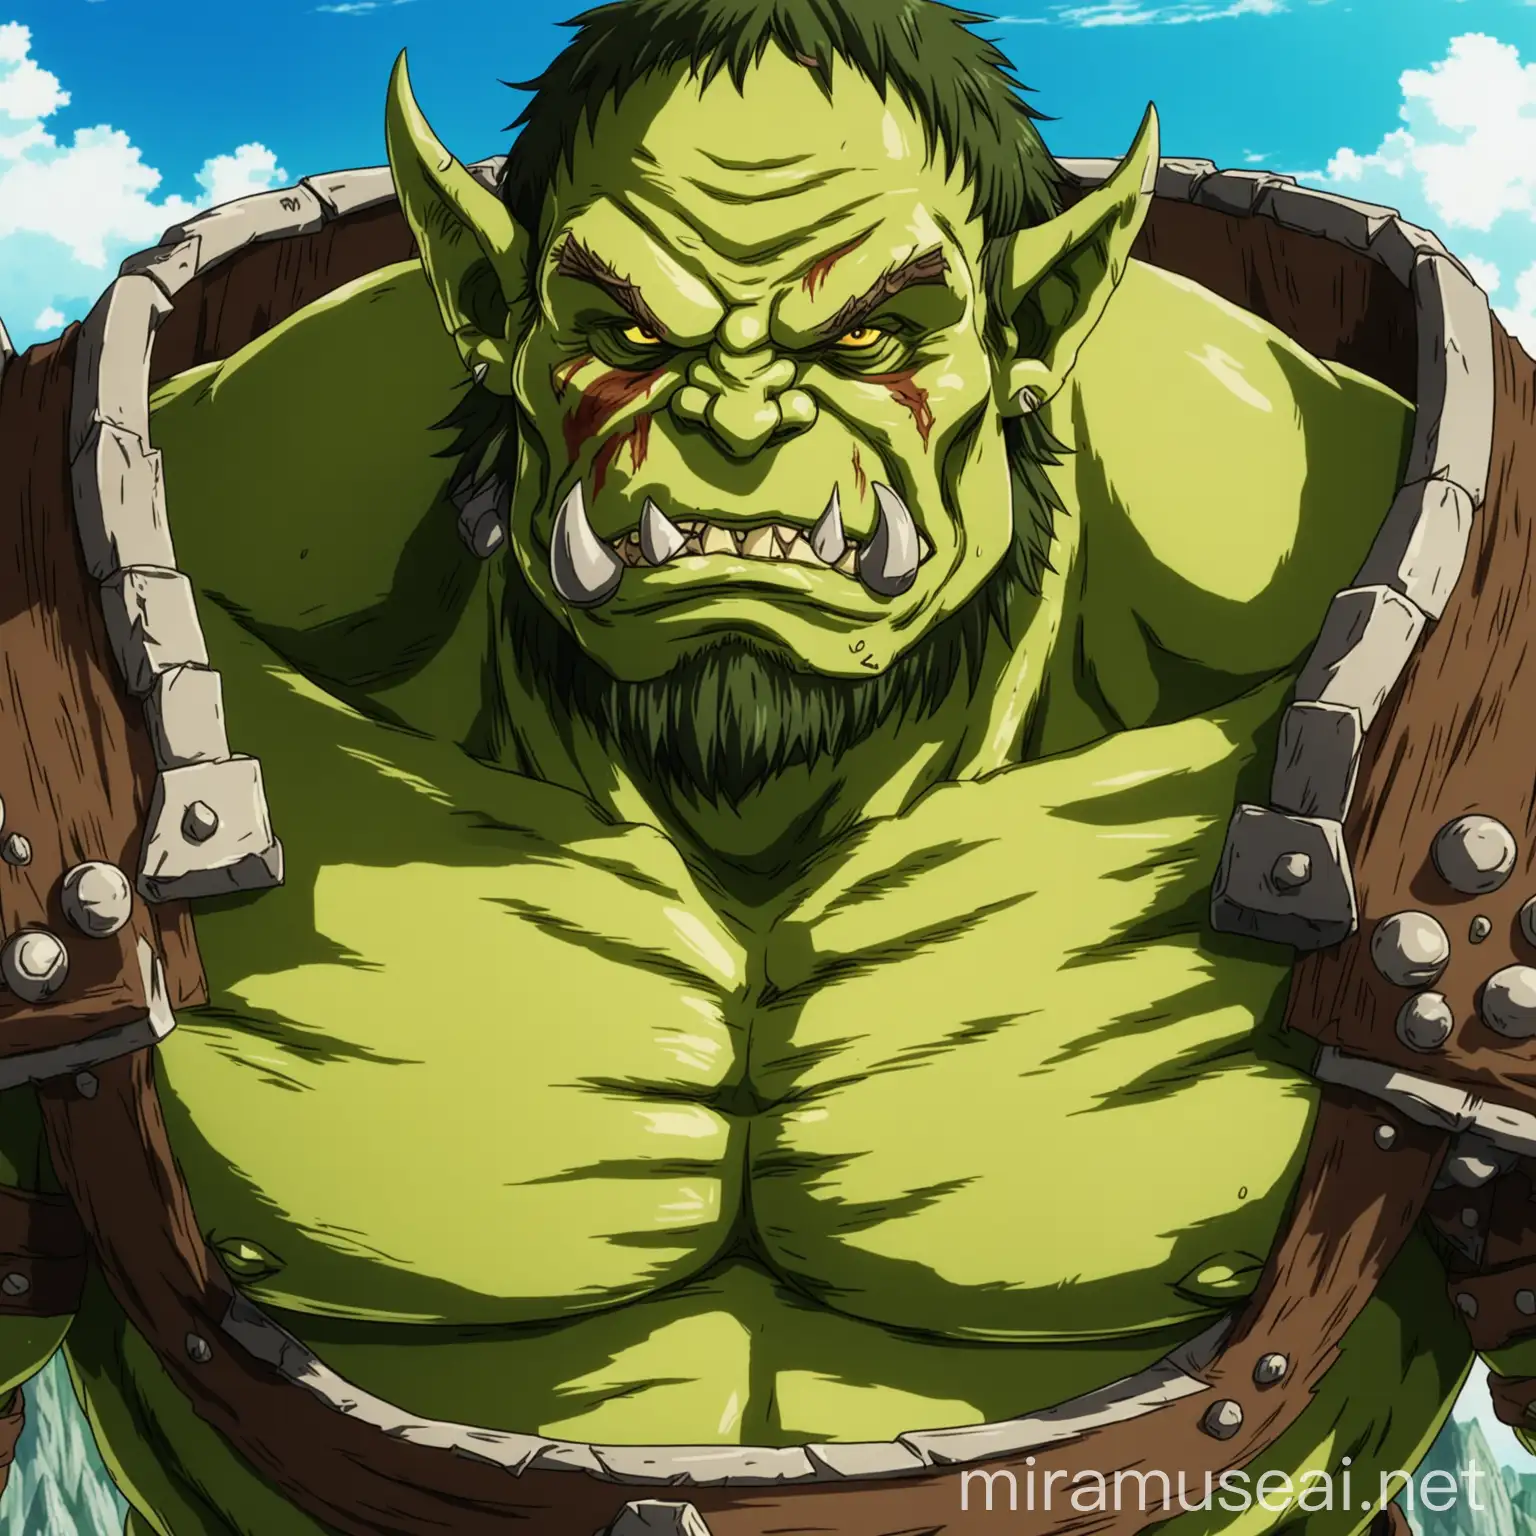 a orc buccanner, in anime